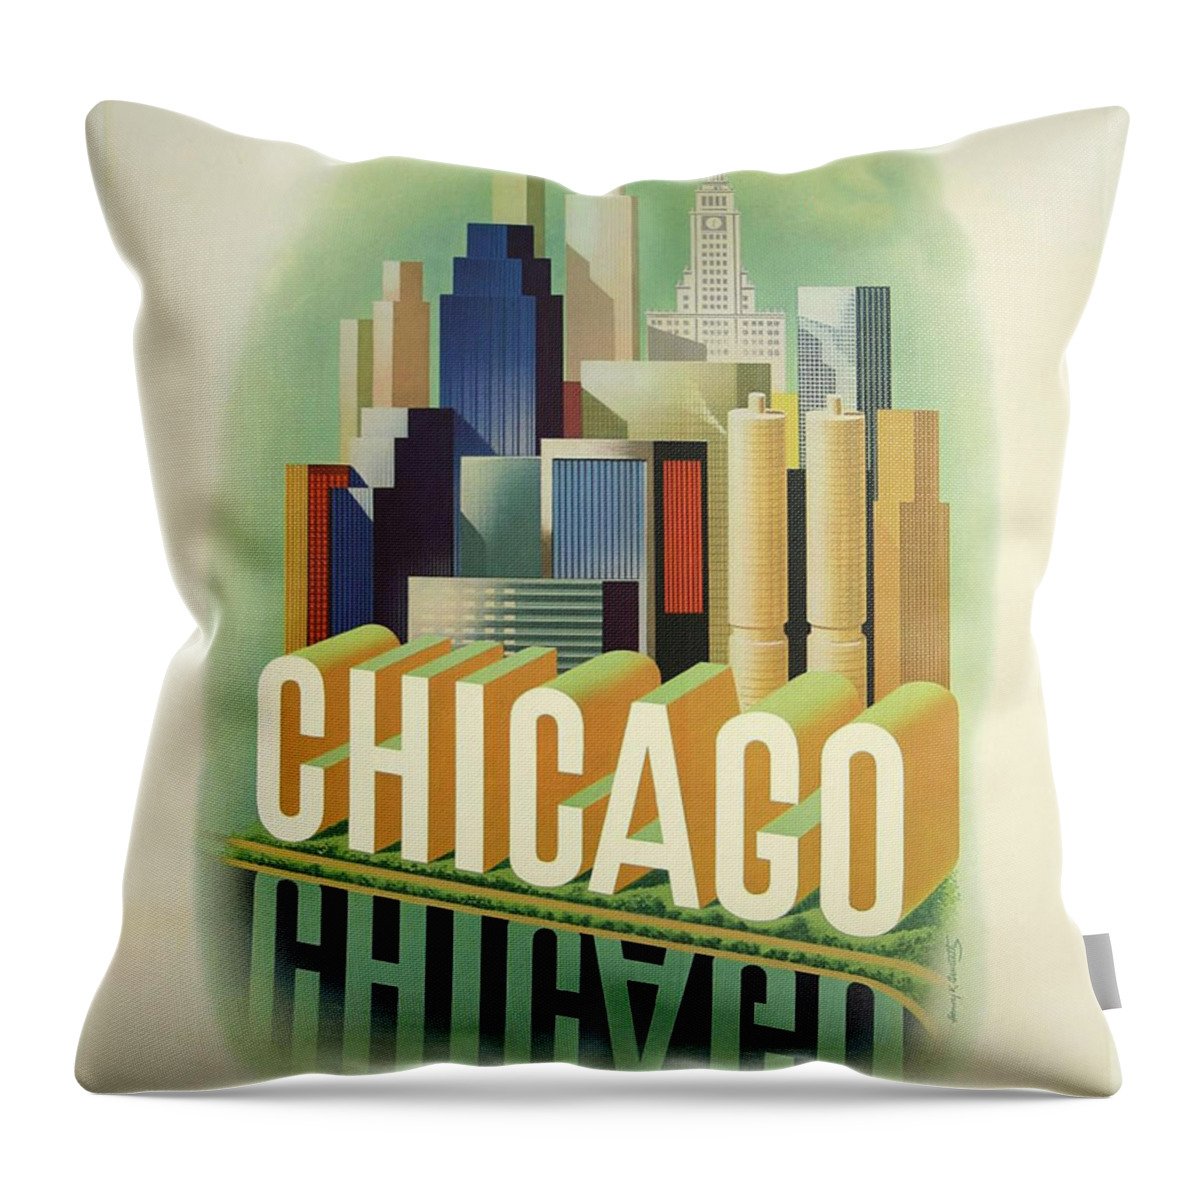 Retro Throw Pillow featuring the photograph Retro Chicago Poster by Action